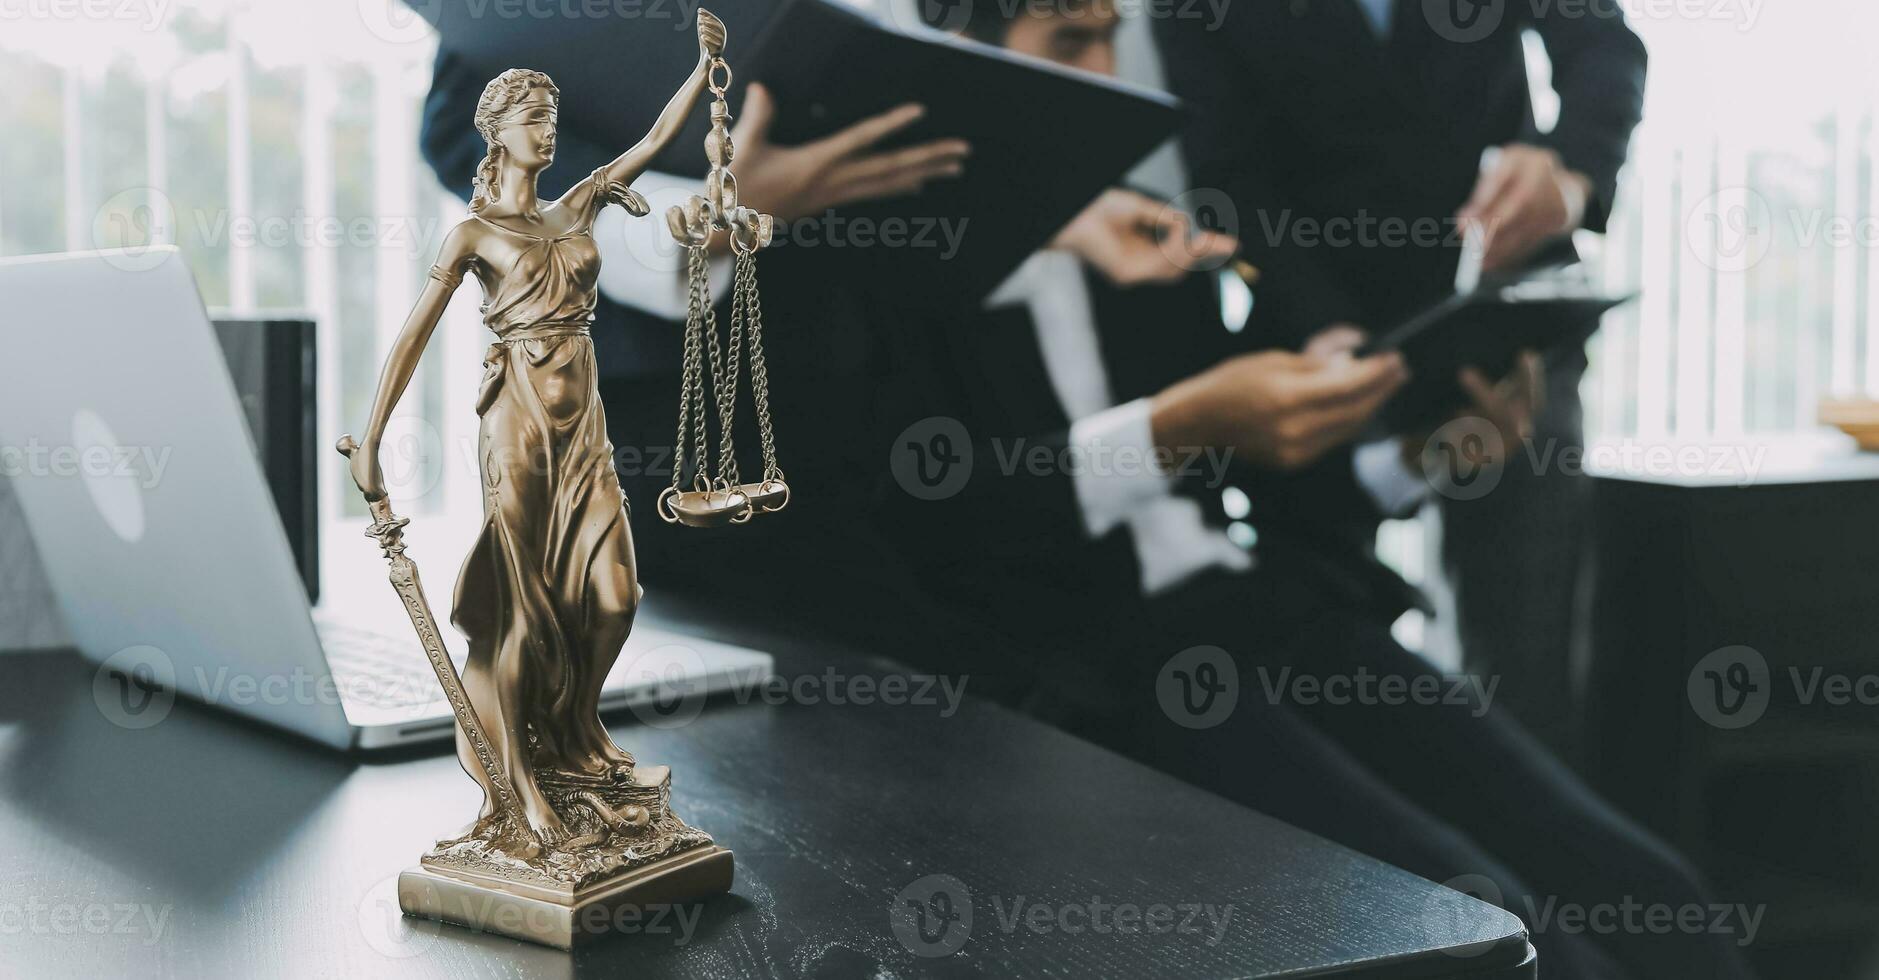 Consultation and conference of Male lawyers and professional businesswoman working and discussion having at law firm in office. Concepts of law, Judge gavel with scales of justice. photo